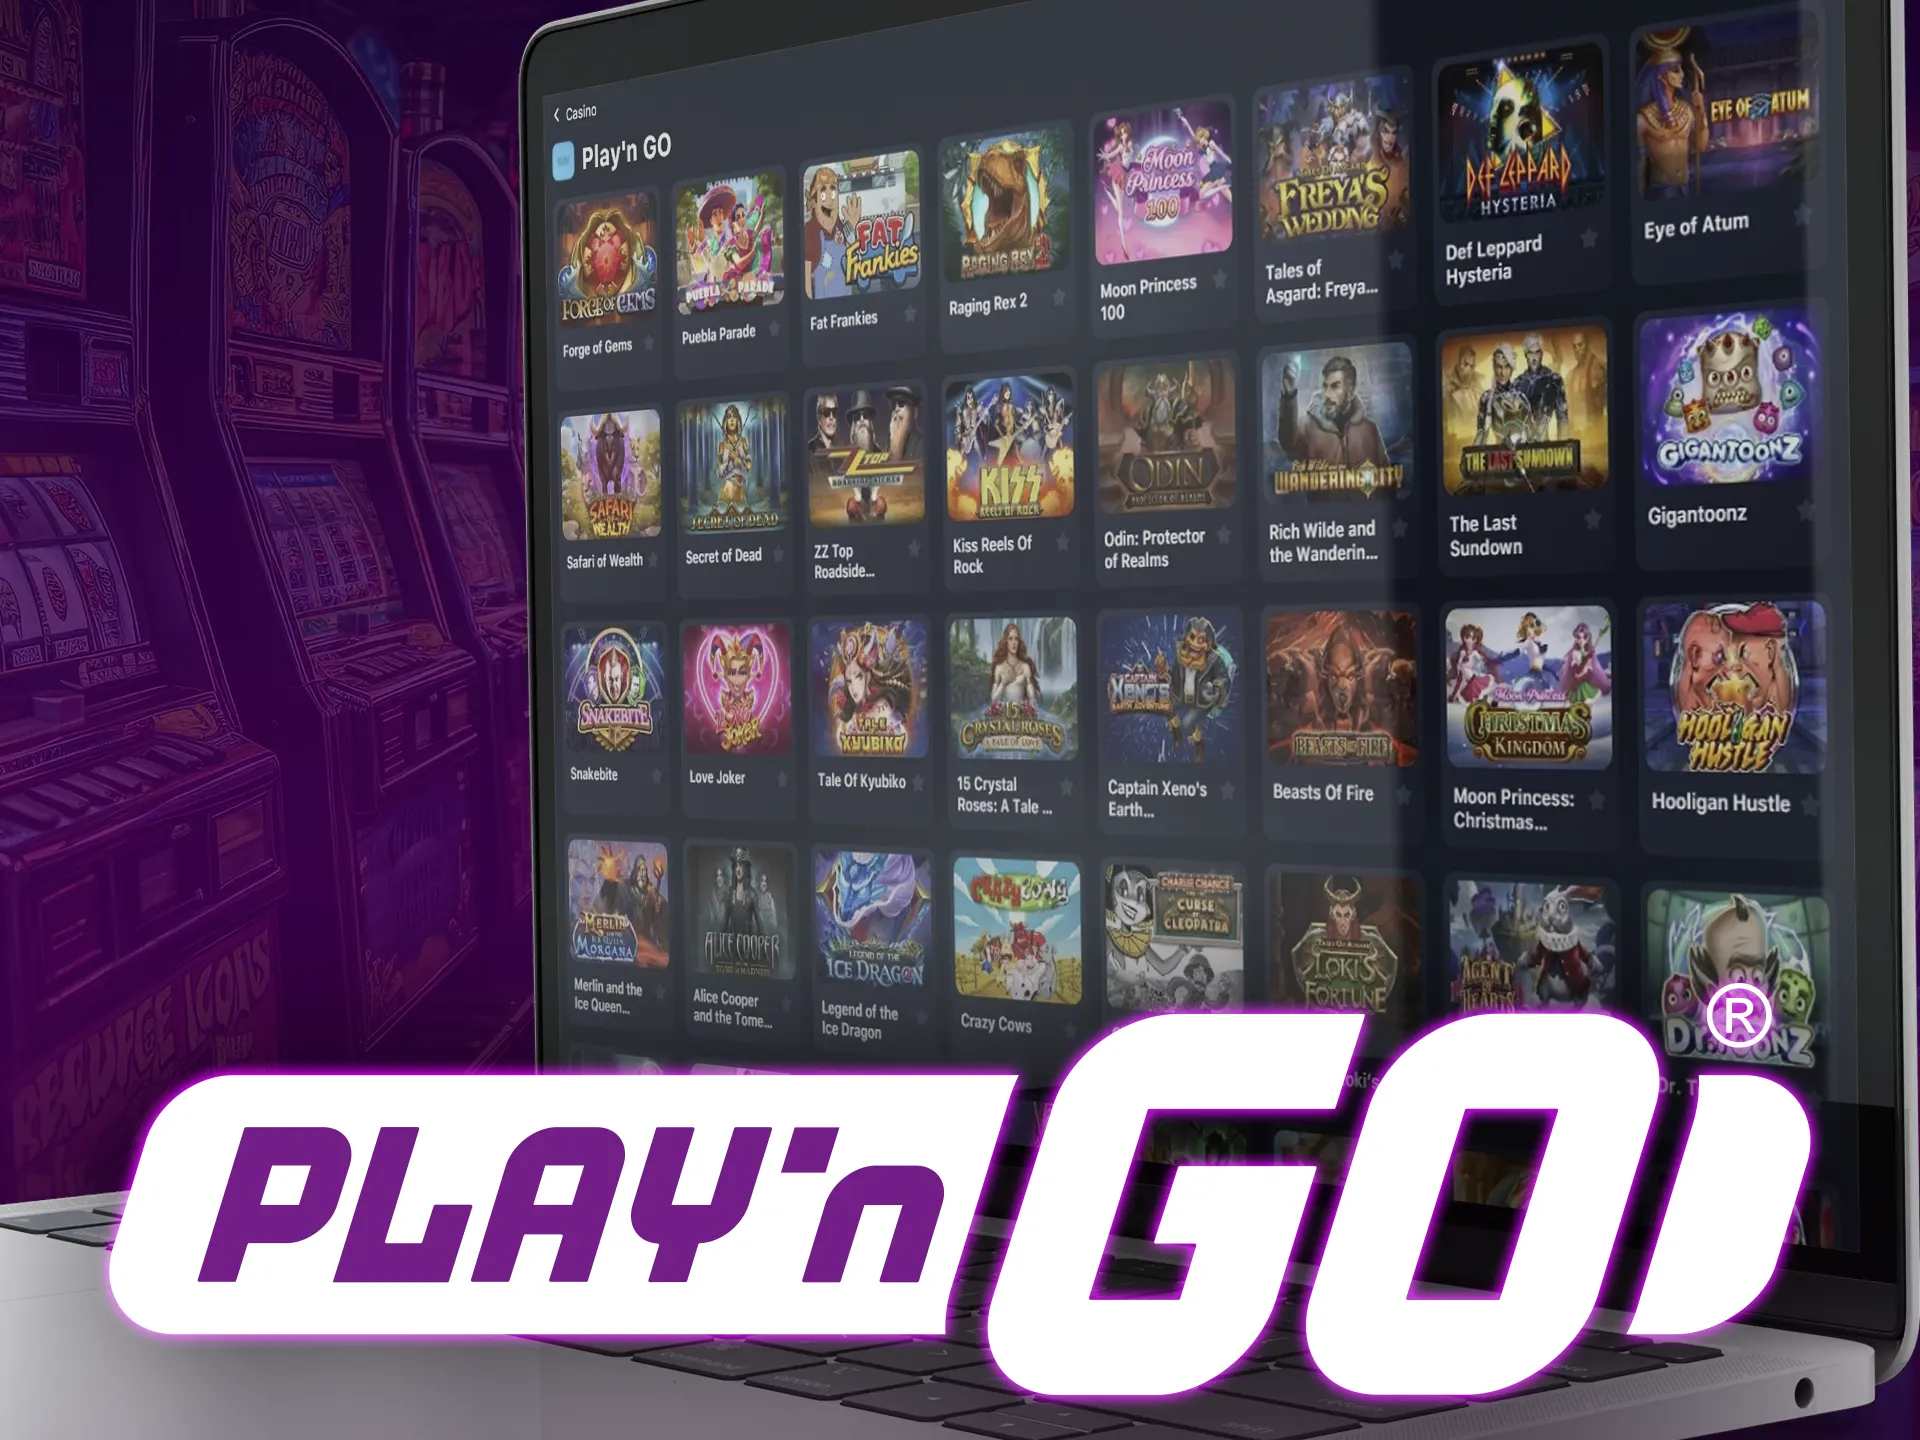 Play'n GO is a famous casino software provider.